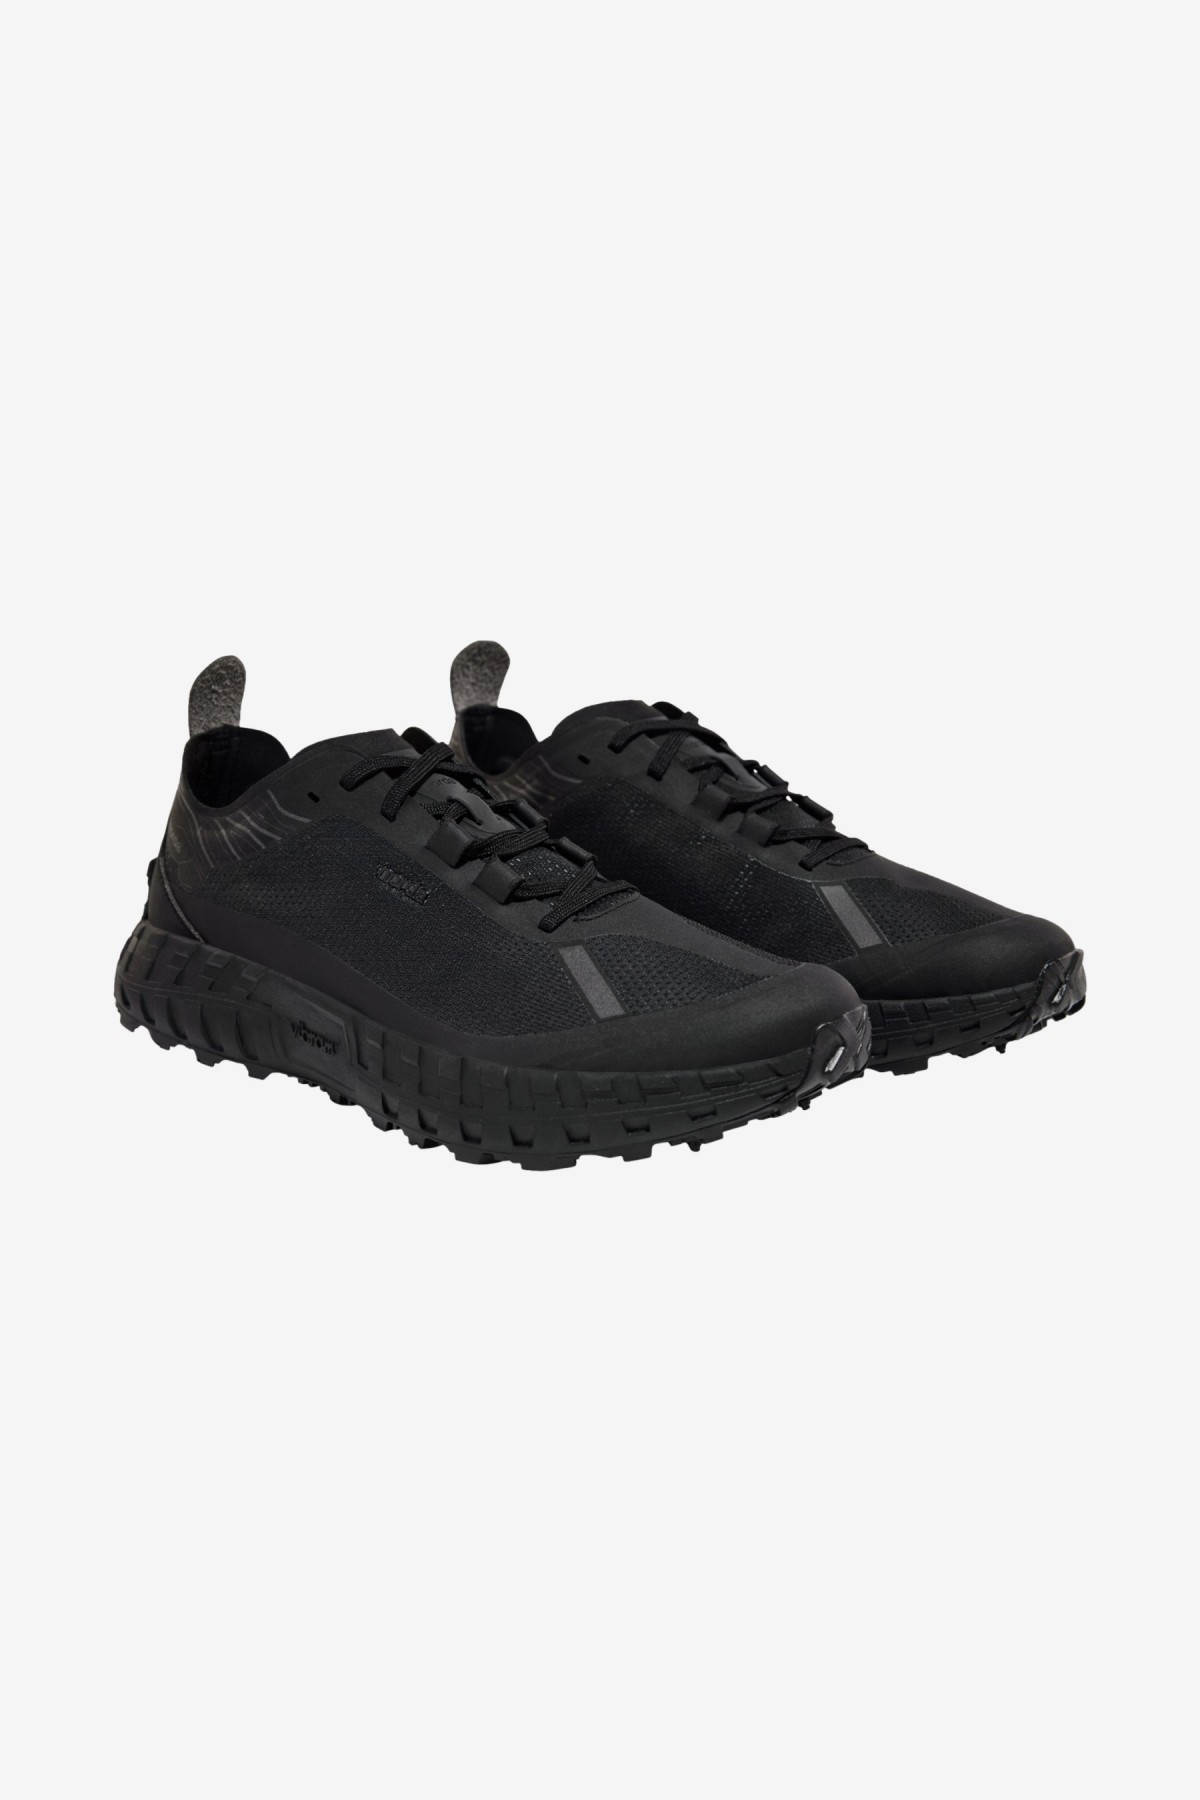 Norda 001 Trail Shoes in Stealth Black